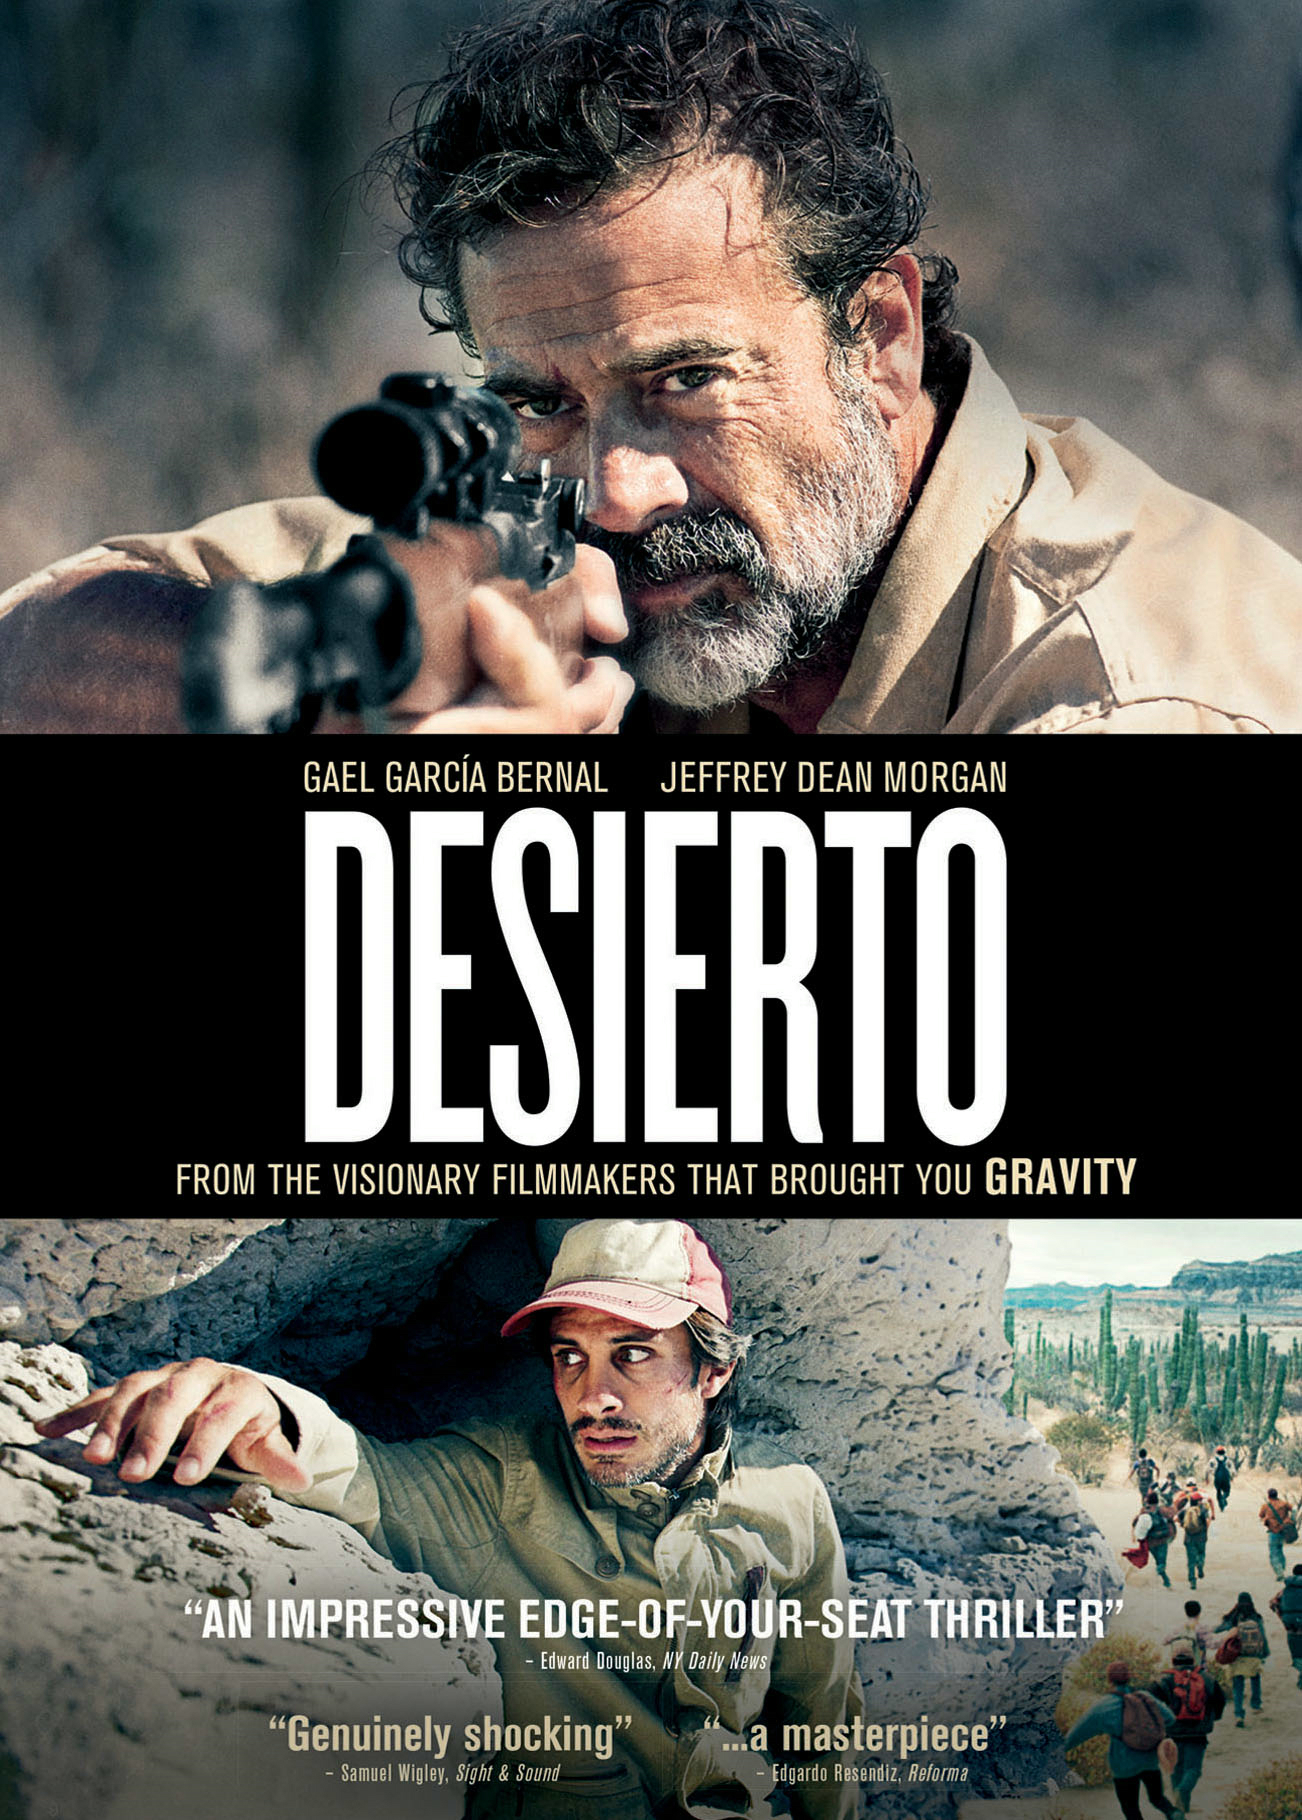 Desierto - DVD [ 2016 ]  - Foreign Movies On DVD - Movies On GRUV